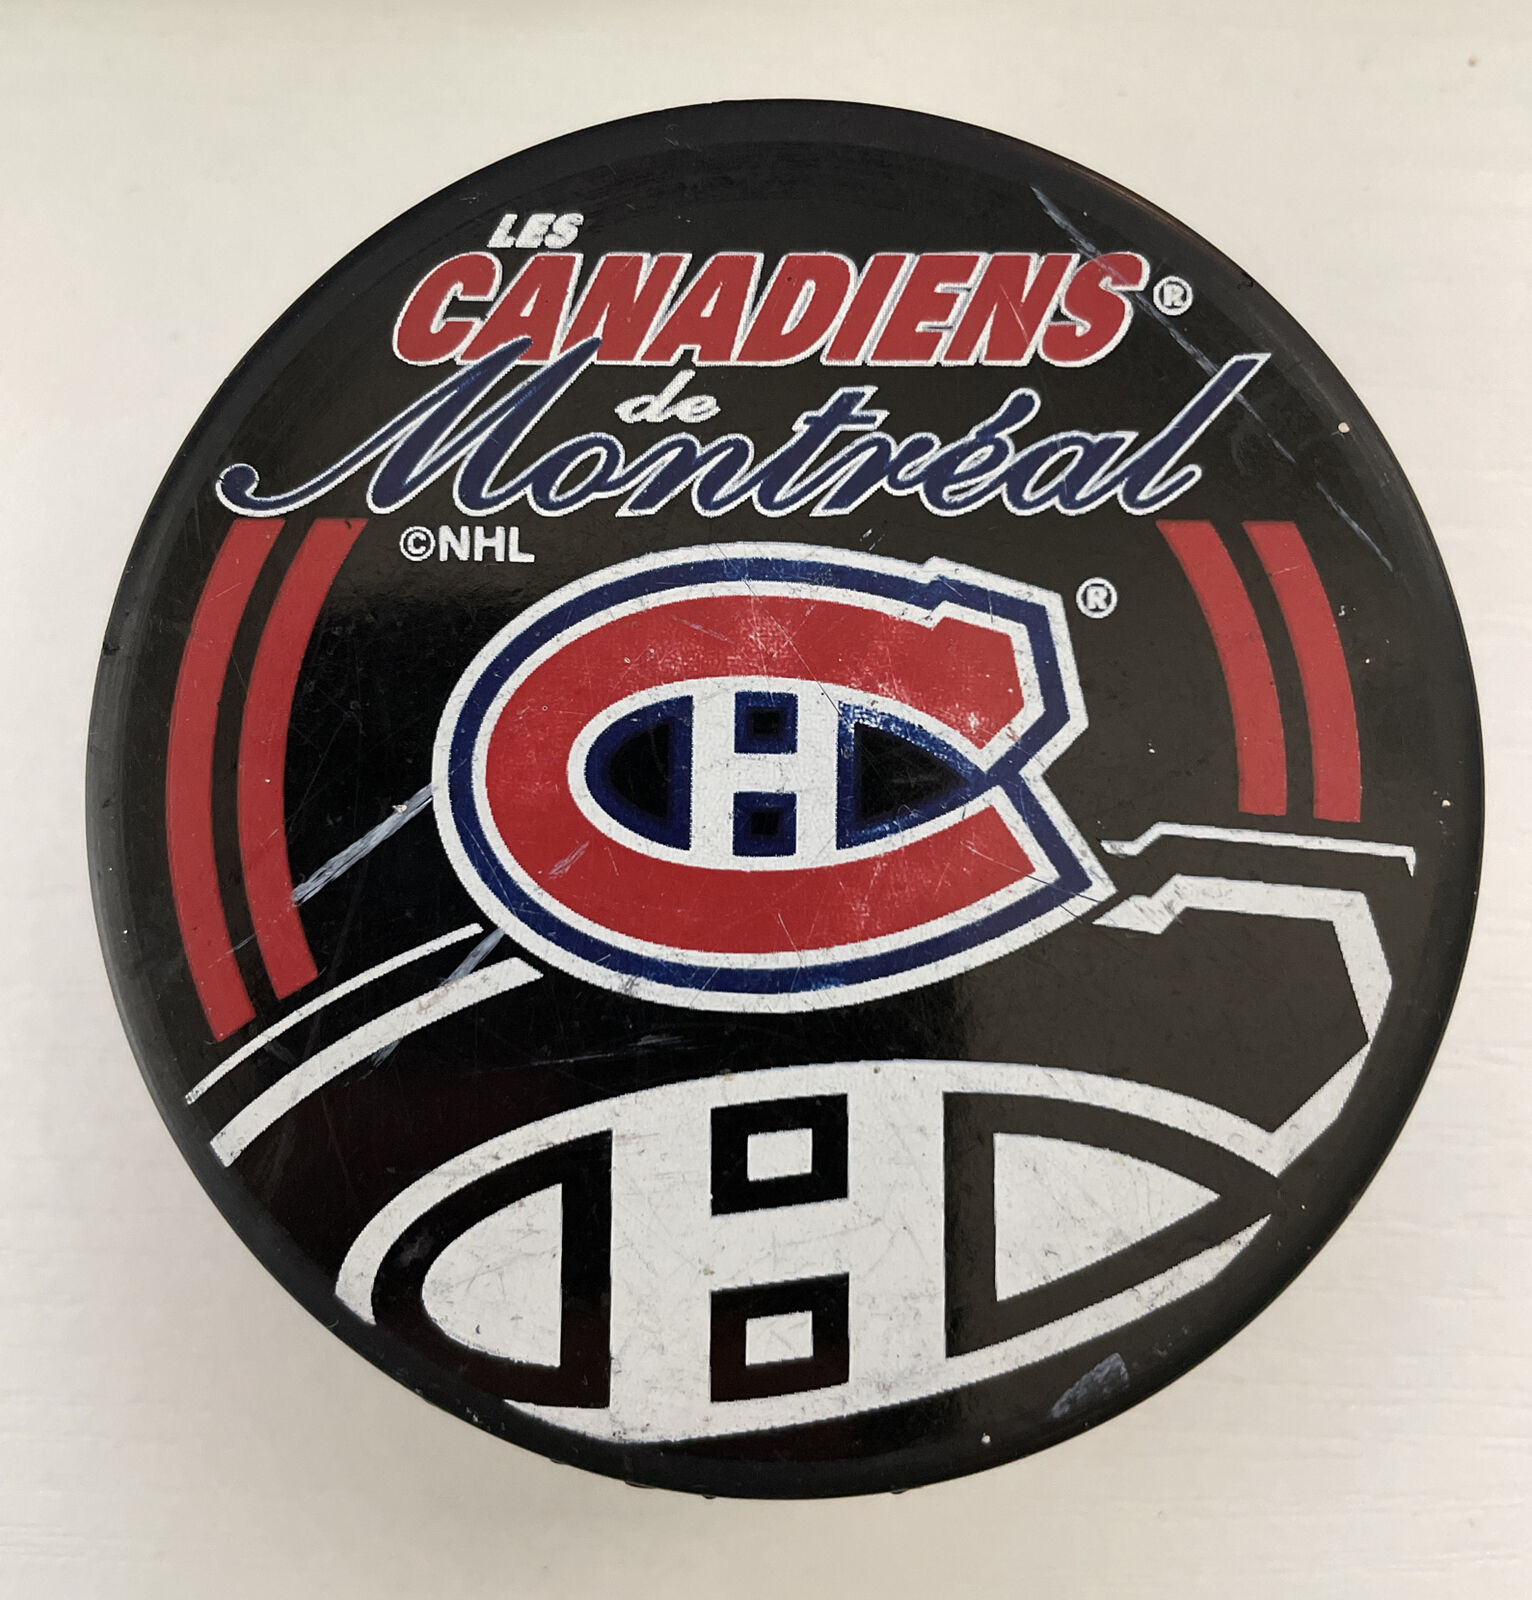 Montreal Canadians “Les Canadiens de Montreal” / NHL Official Hockey Puck